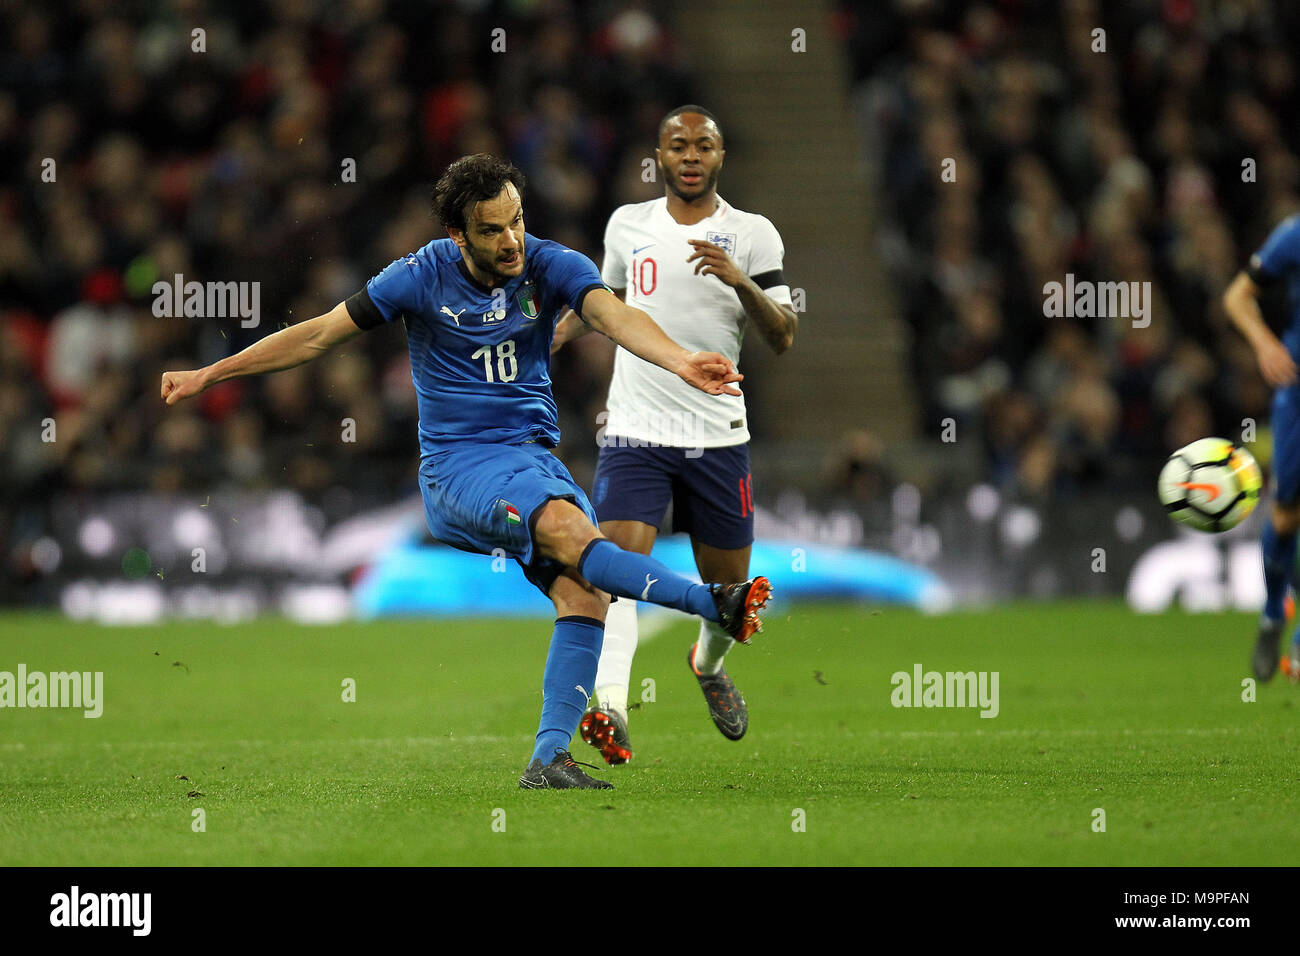 London, UK. 27th March, 2018. Marco Parolo of Italy during the International Friendly match between England and Italy at Wembley Stadium on March 27th 2018 in London, England. (Photo by Matt Bradshaw/phcimages.com) Credit: PHC Images/Alamy Live News Stock Photo